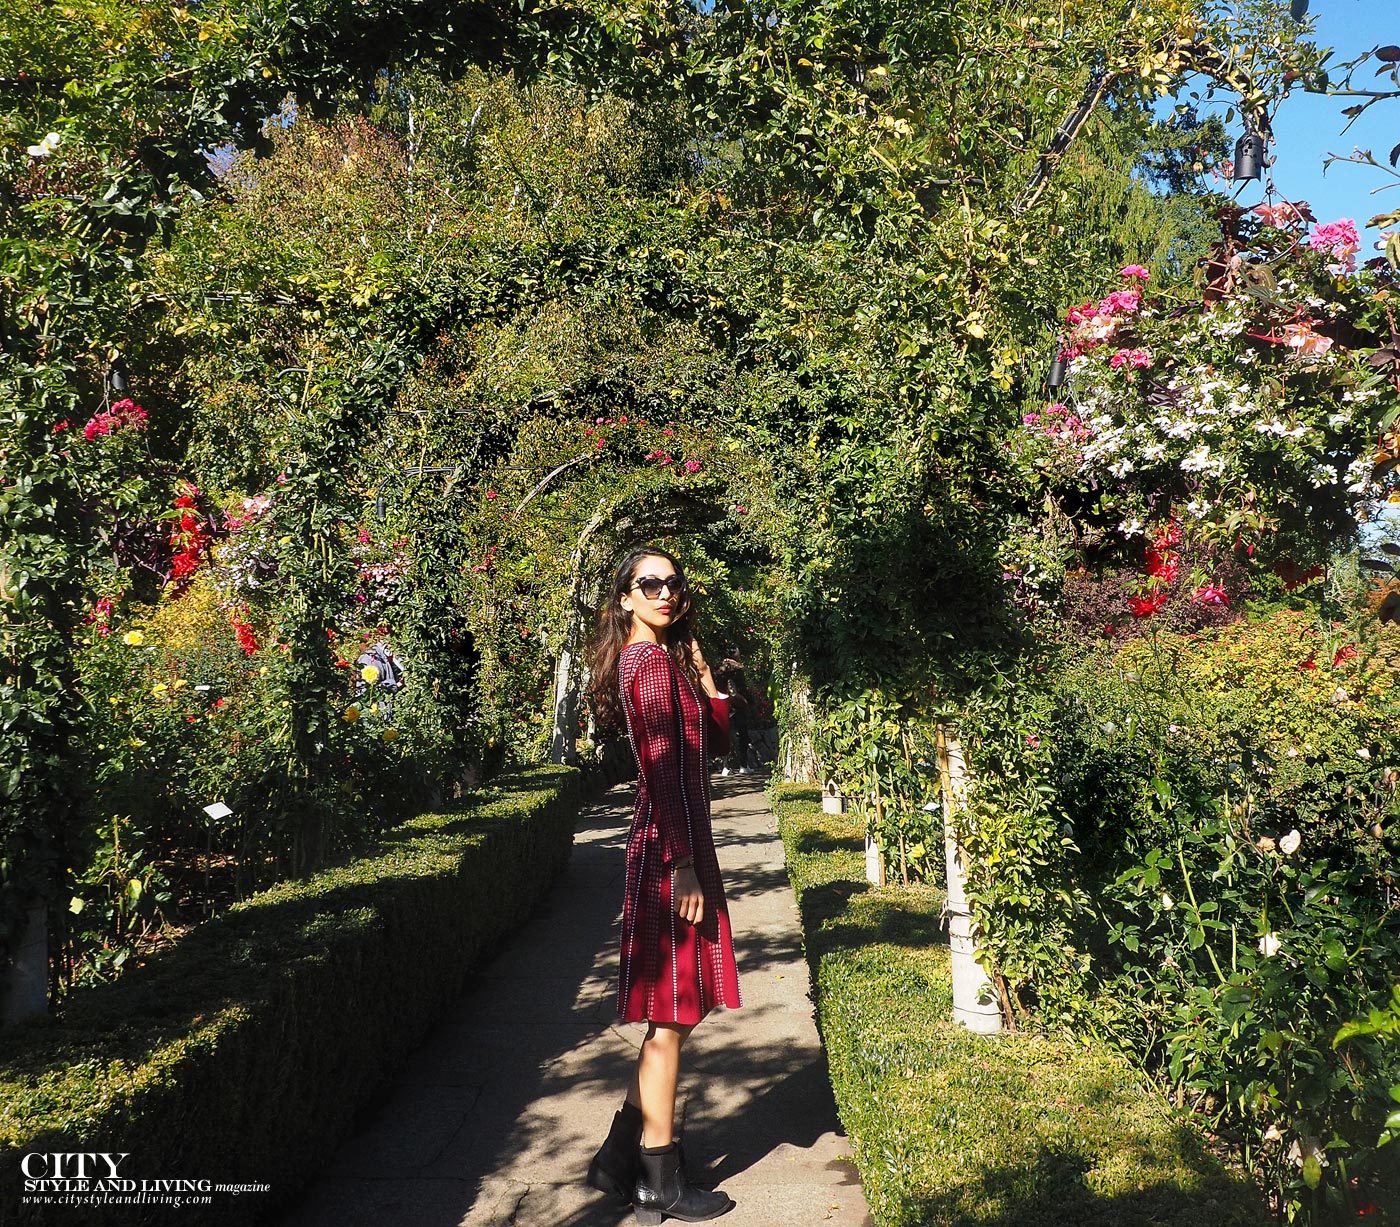 City style and living magazine Editors Notebook style fashion blogger Butchart Gardens Rose Gardens